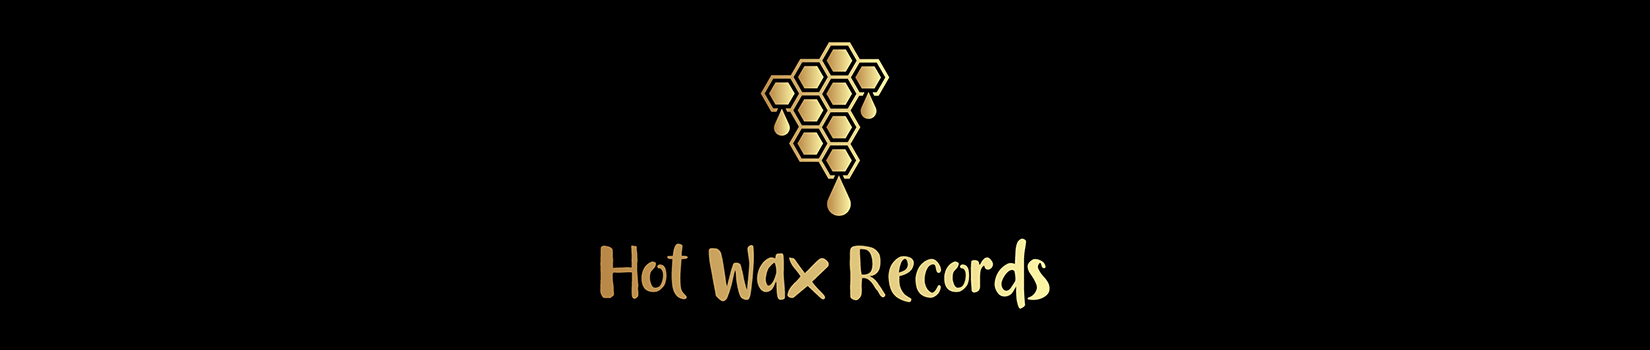 Hotwax Records